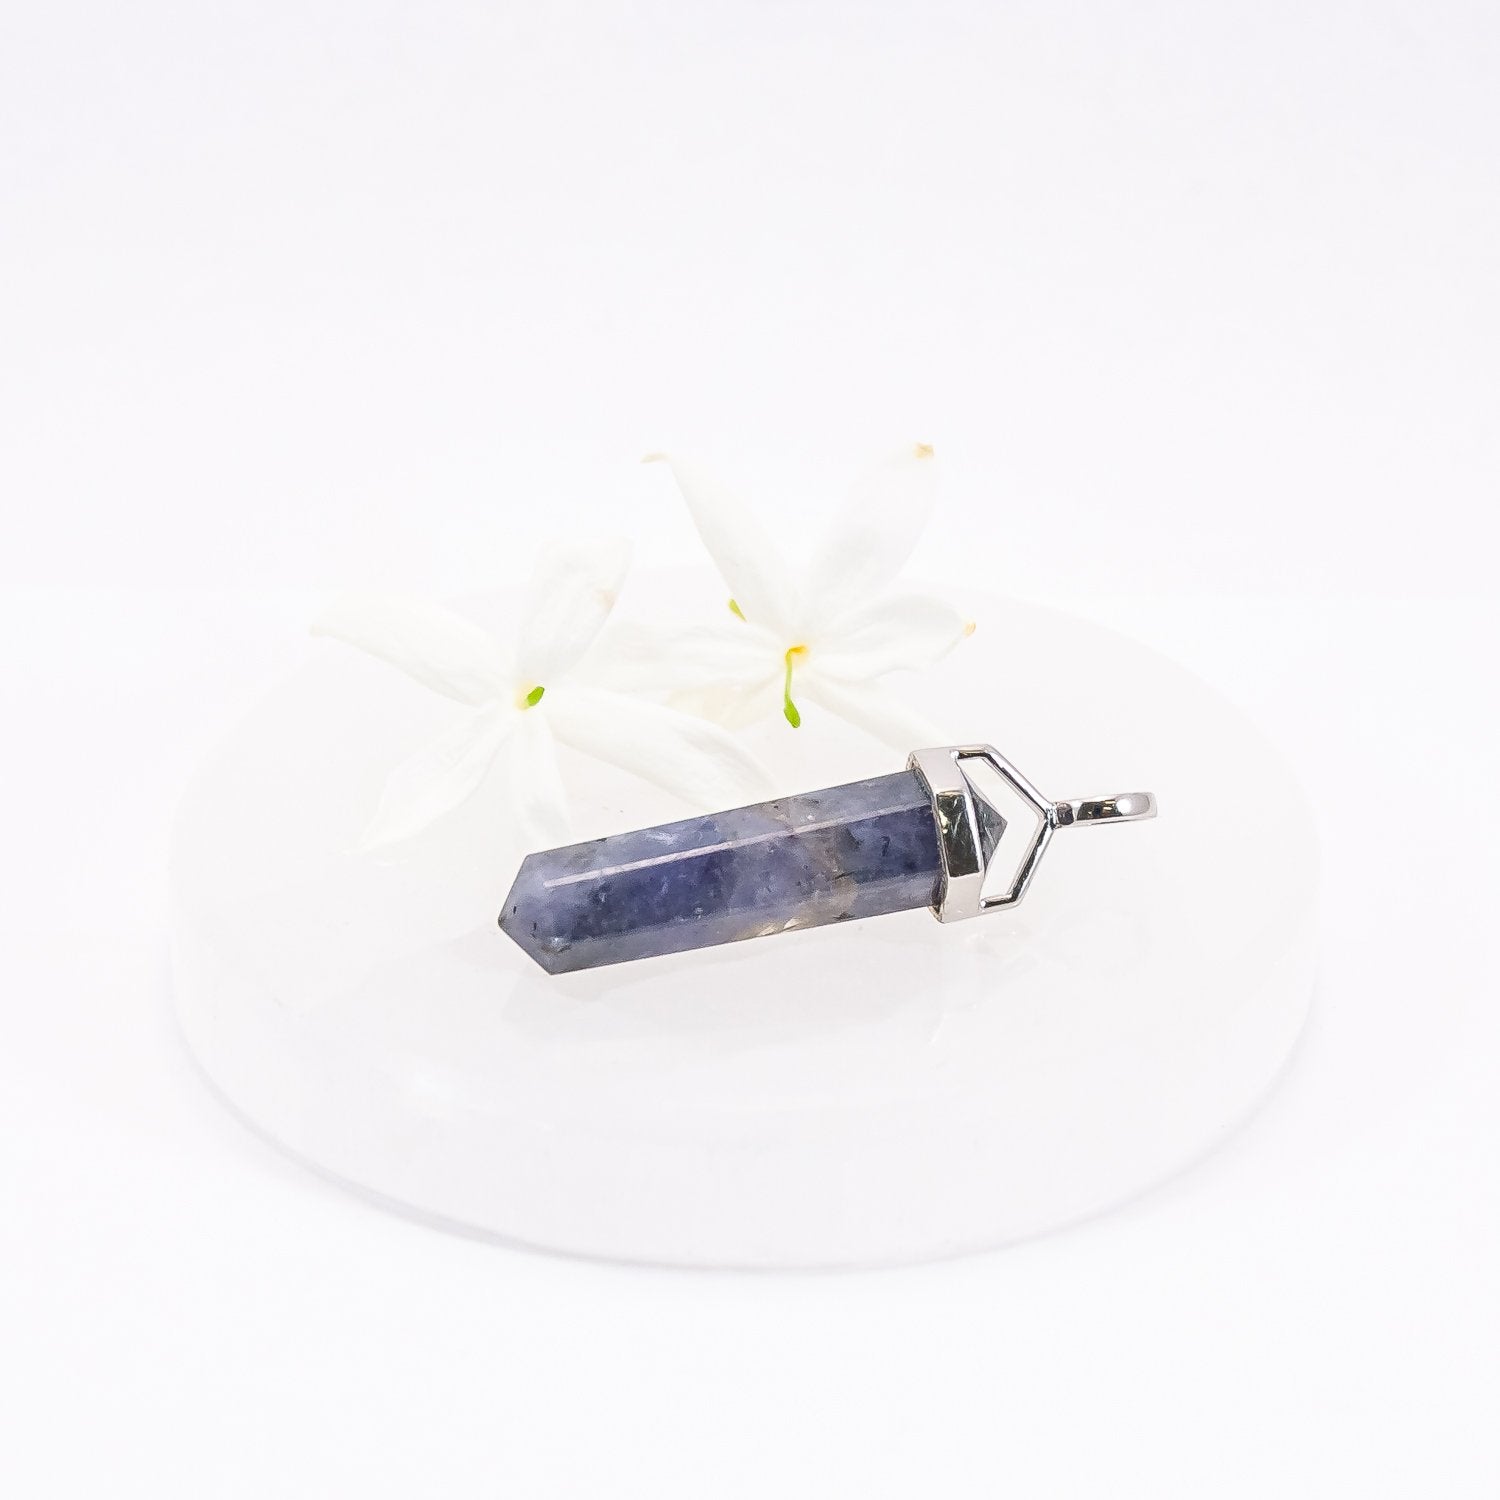 Tanzanite crystal pendant sitting on selenite plate with flowers.